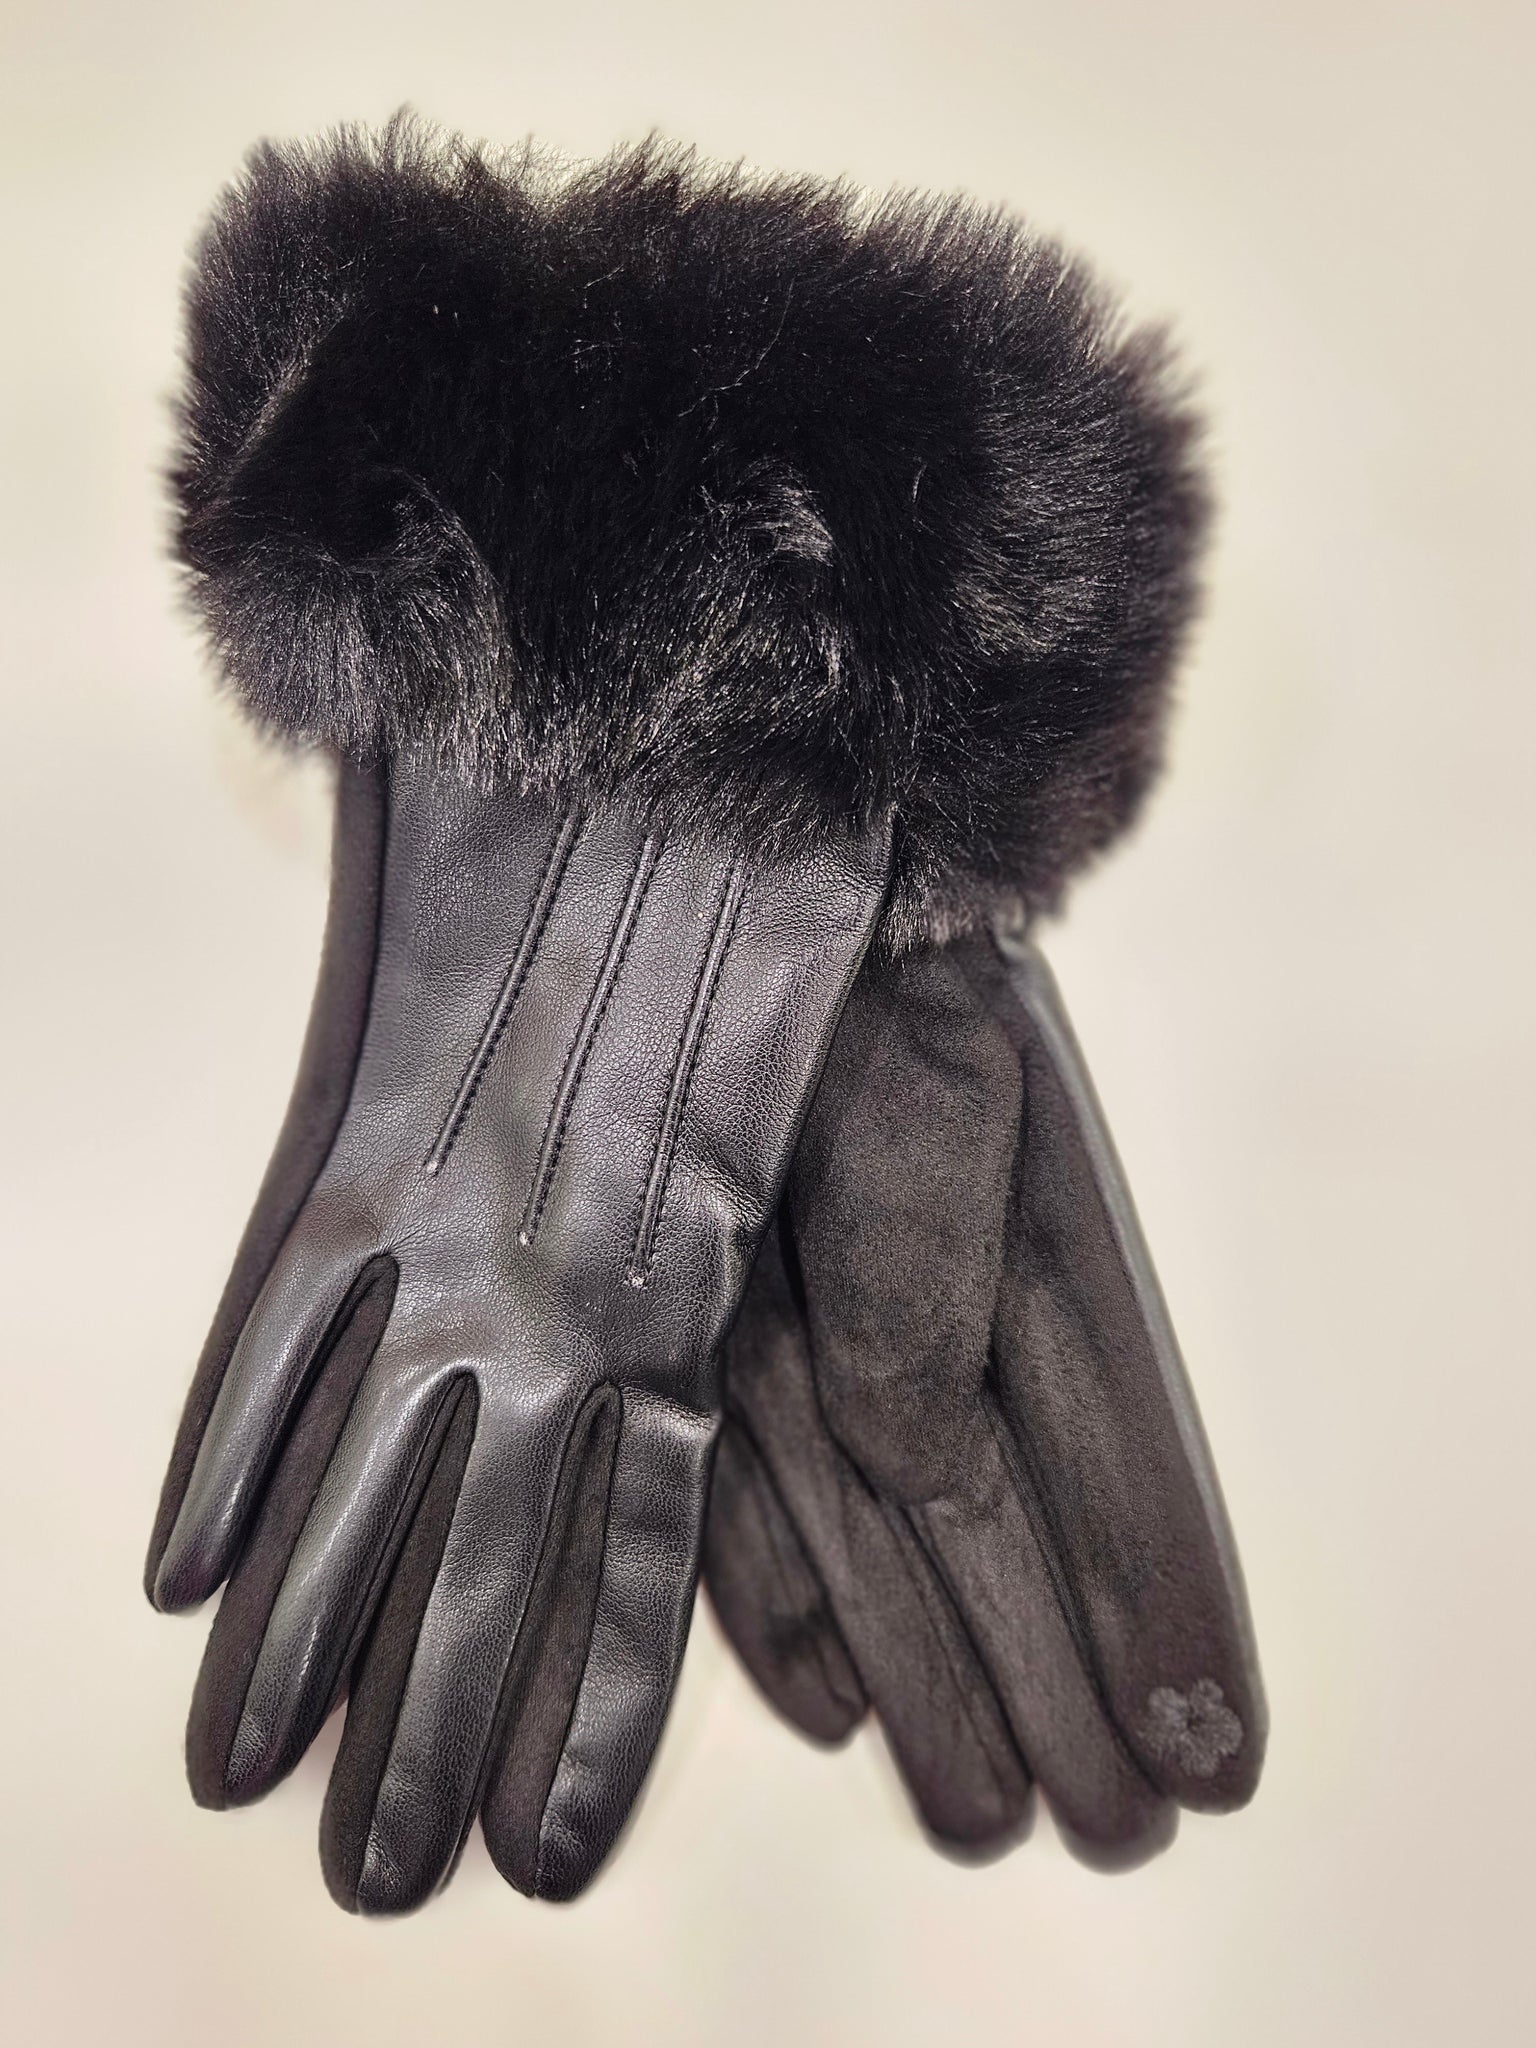 Faux Leather and Suede Velvet lined gloves with Fur Cuffs. All Colours